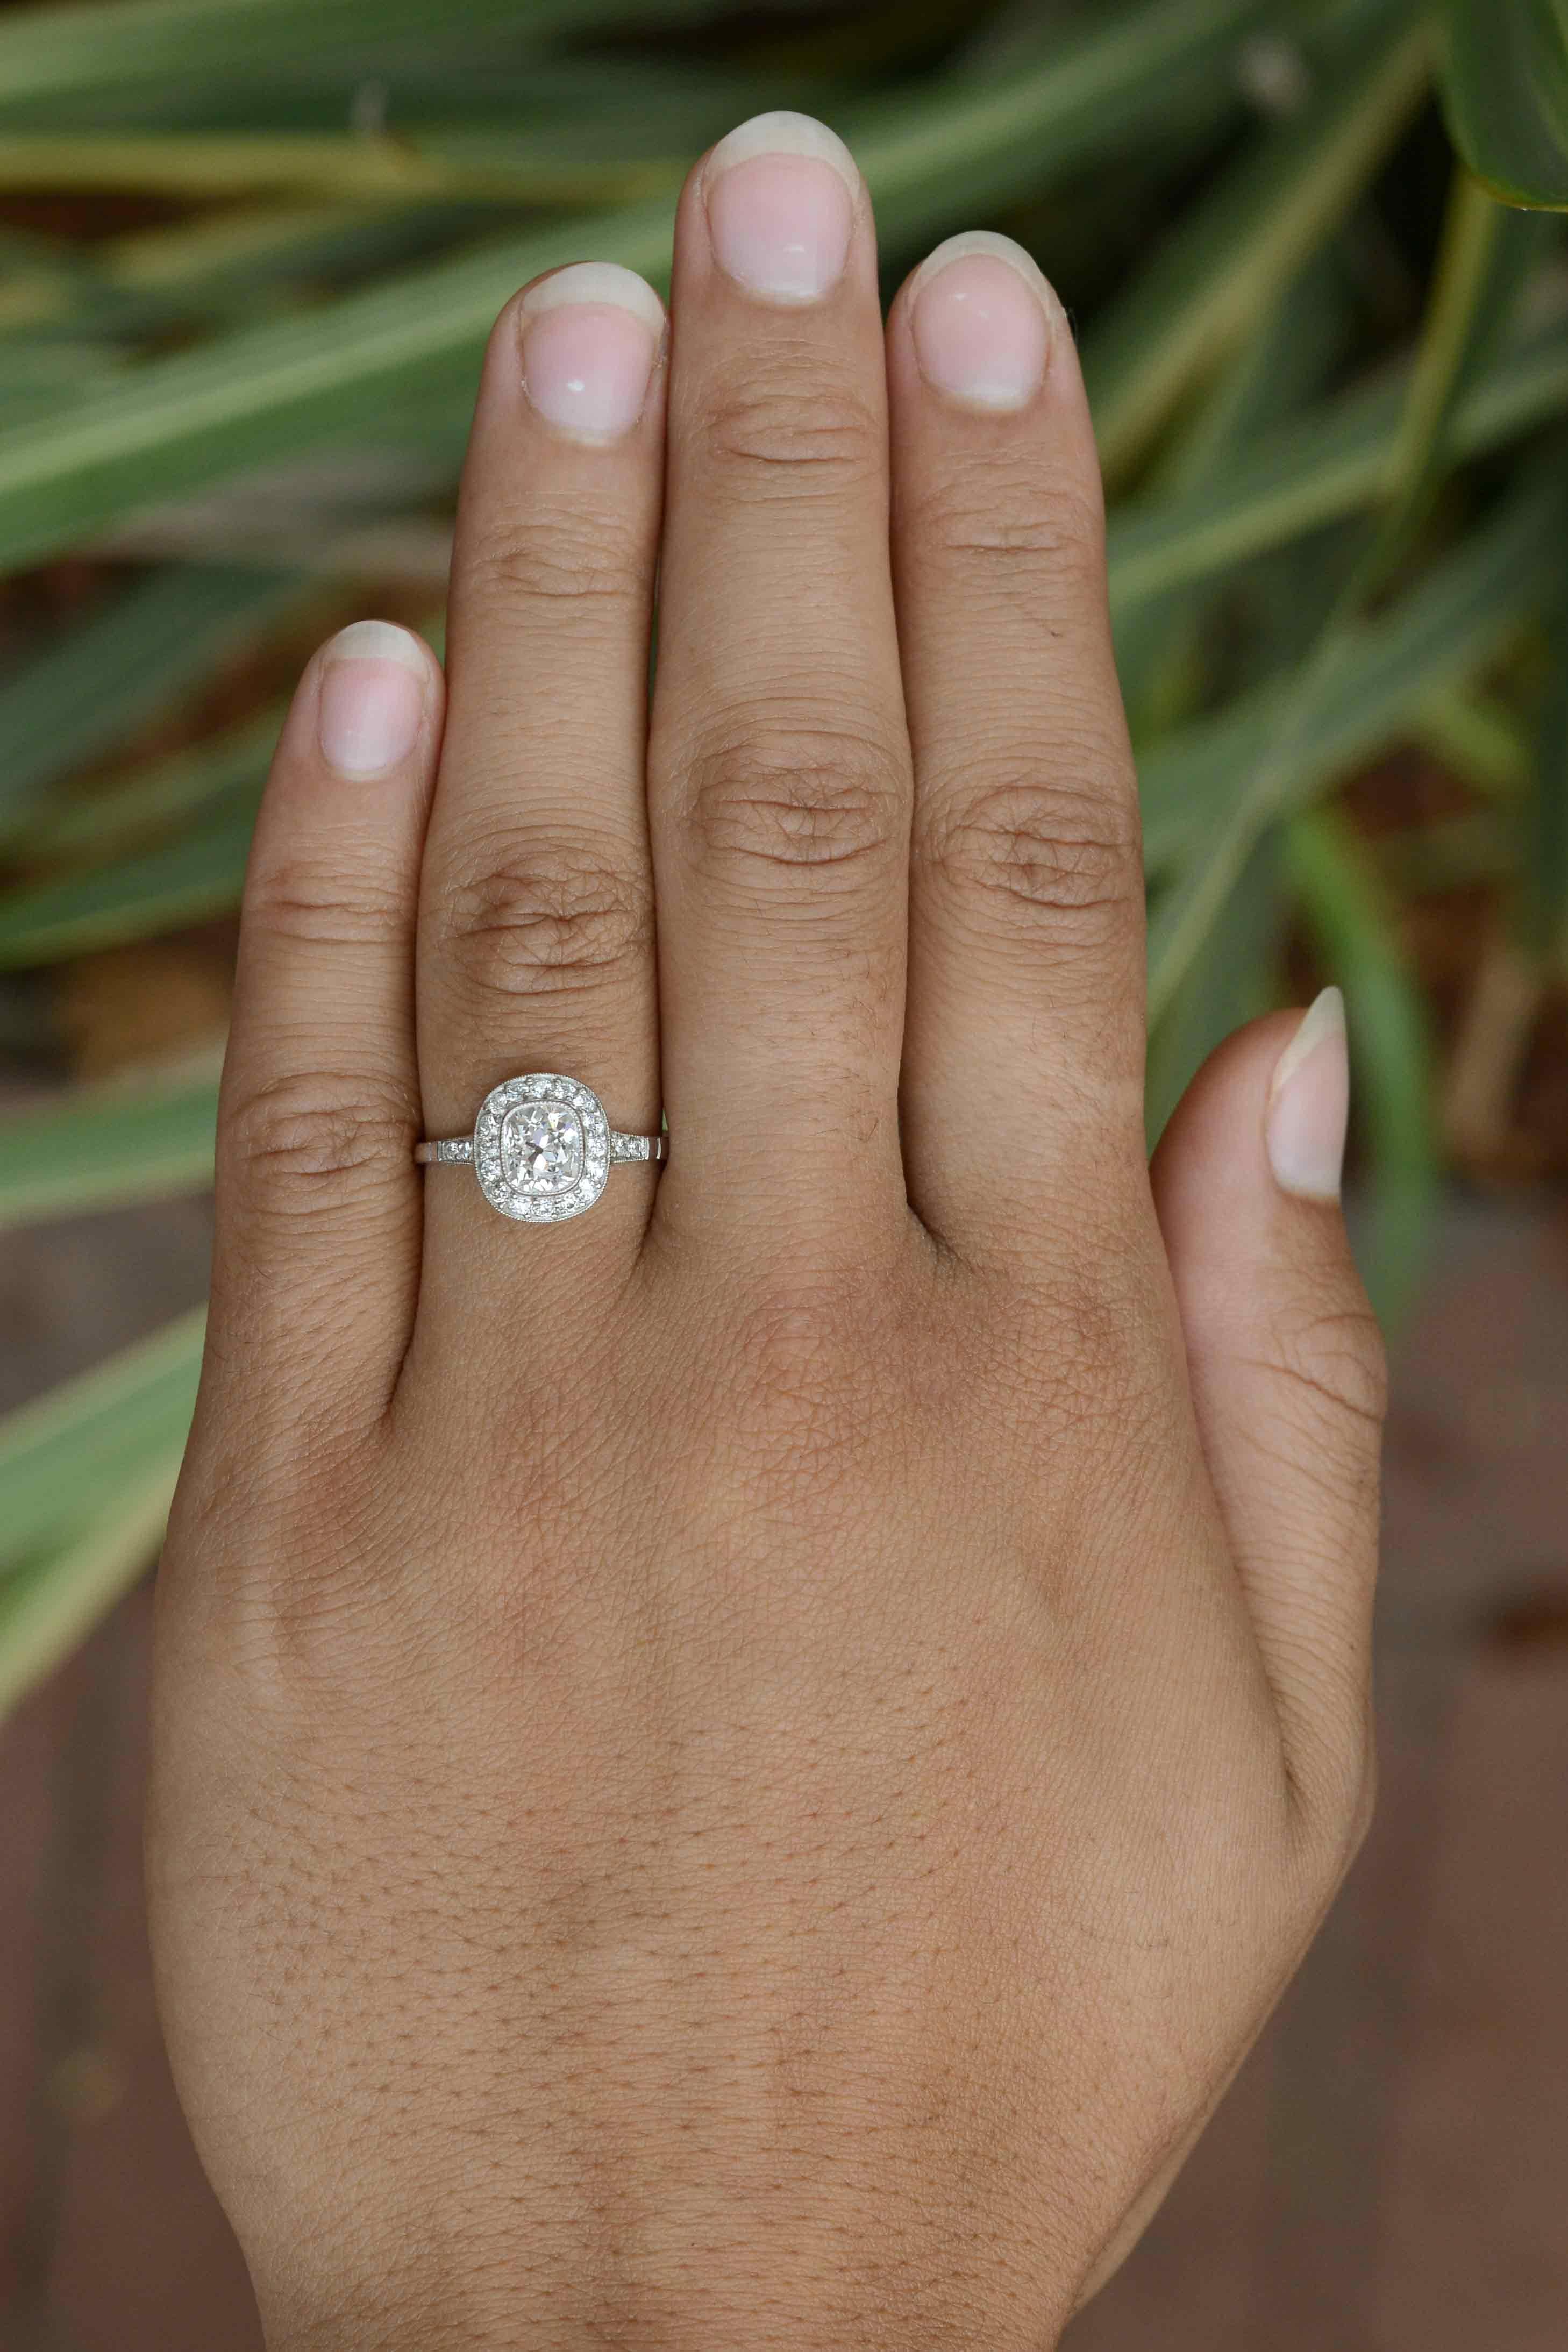 The shimmer of this over 1 carat old mine cushion diamond engagement ring is absolutely mesmerizing. Graded near colorless and blessed with fantastic clarity, the chunky facets of this beauty are brought to life in an Art Deco style halo, the bezel